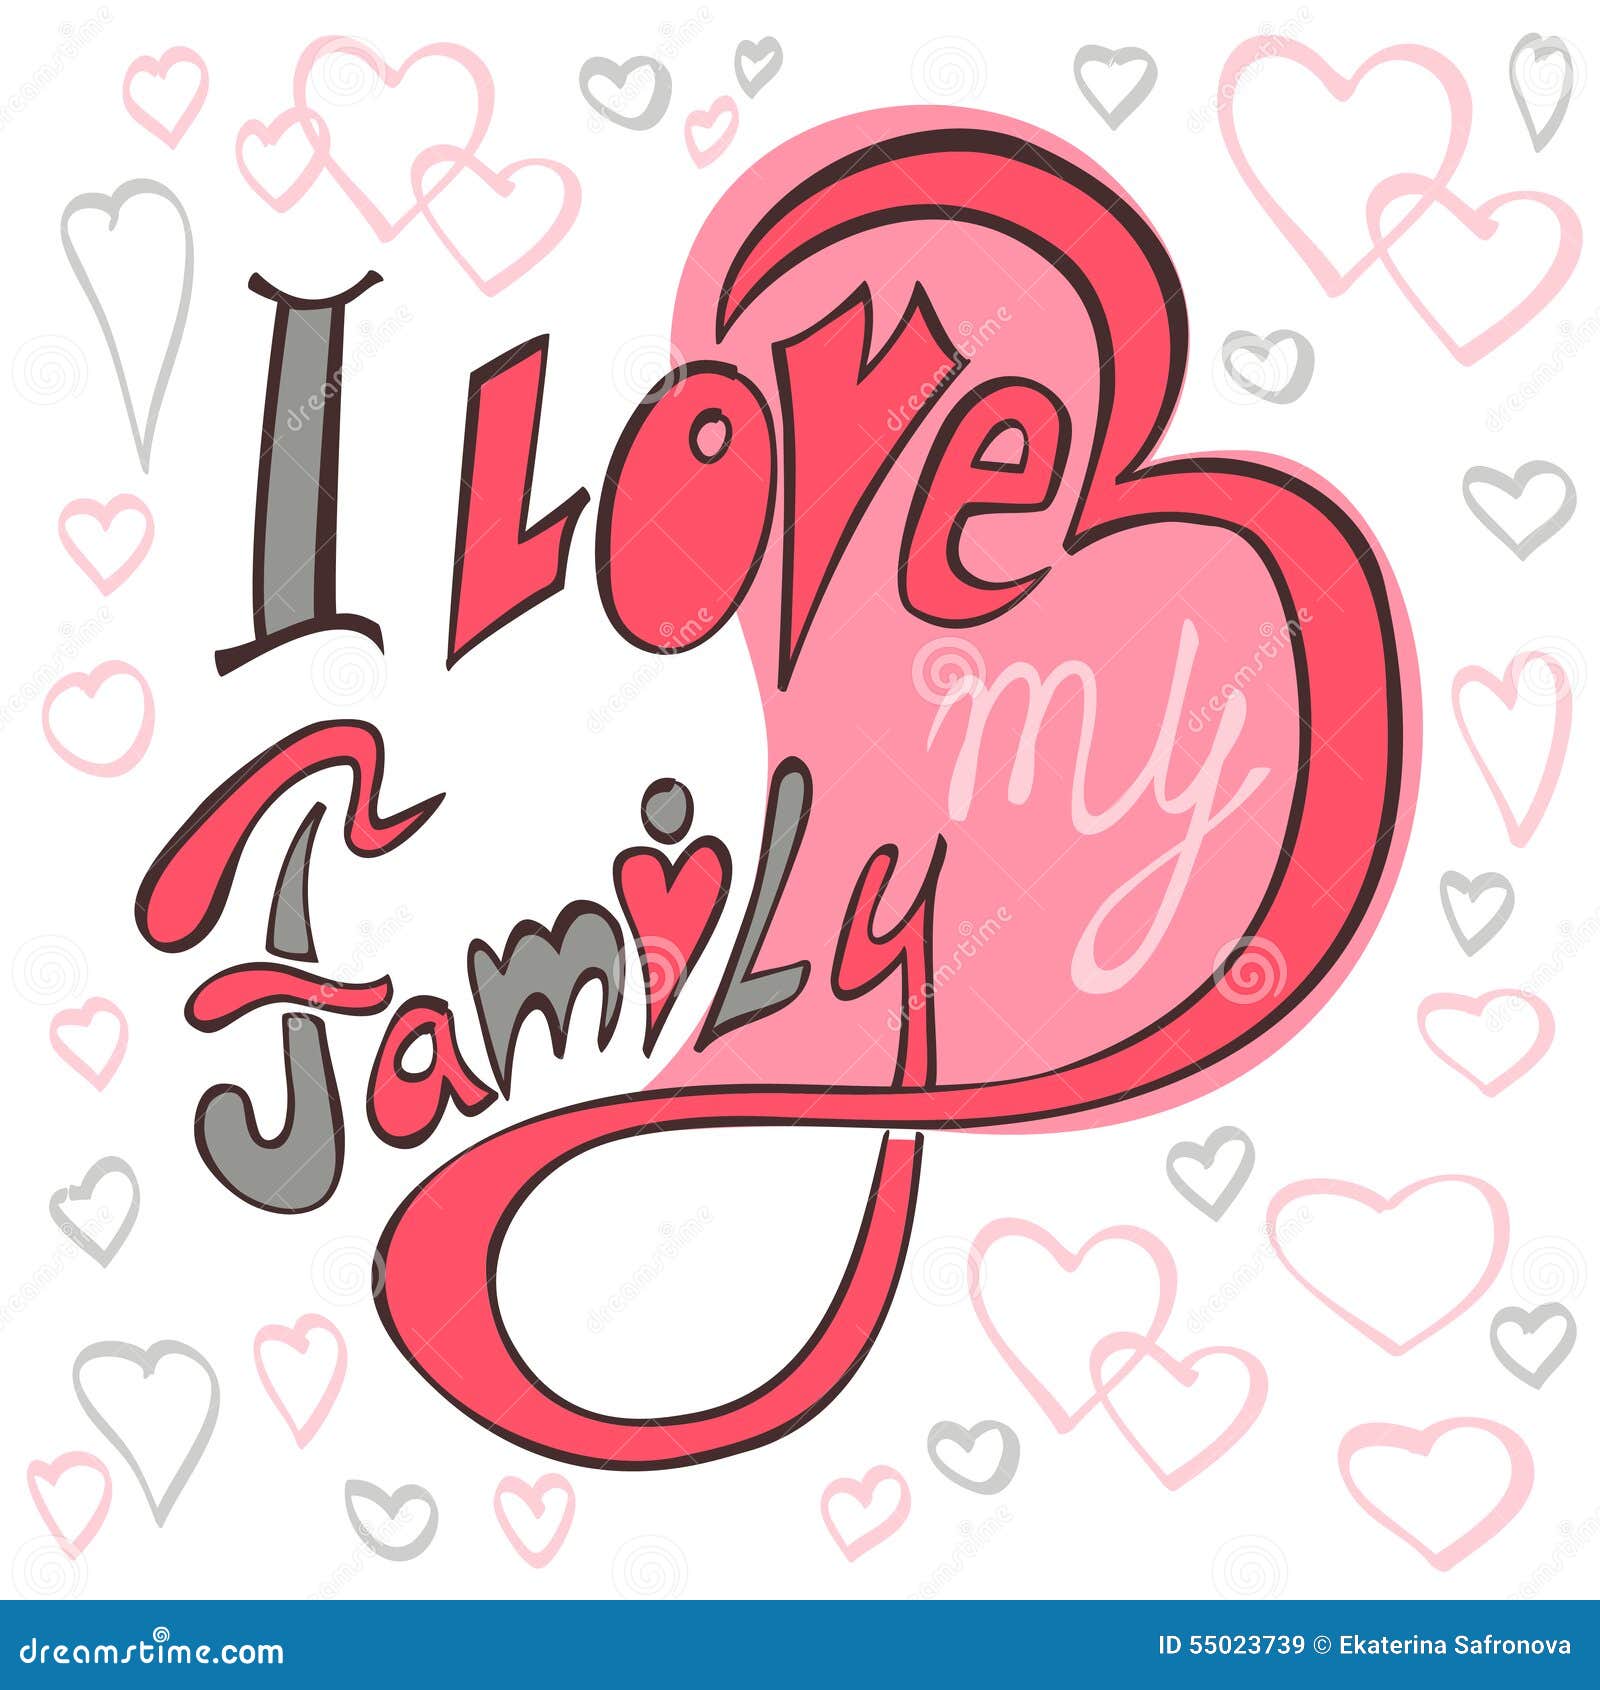 I Love My Family Wallpaper 55 images